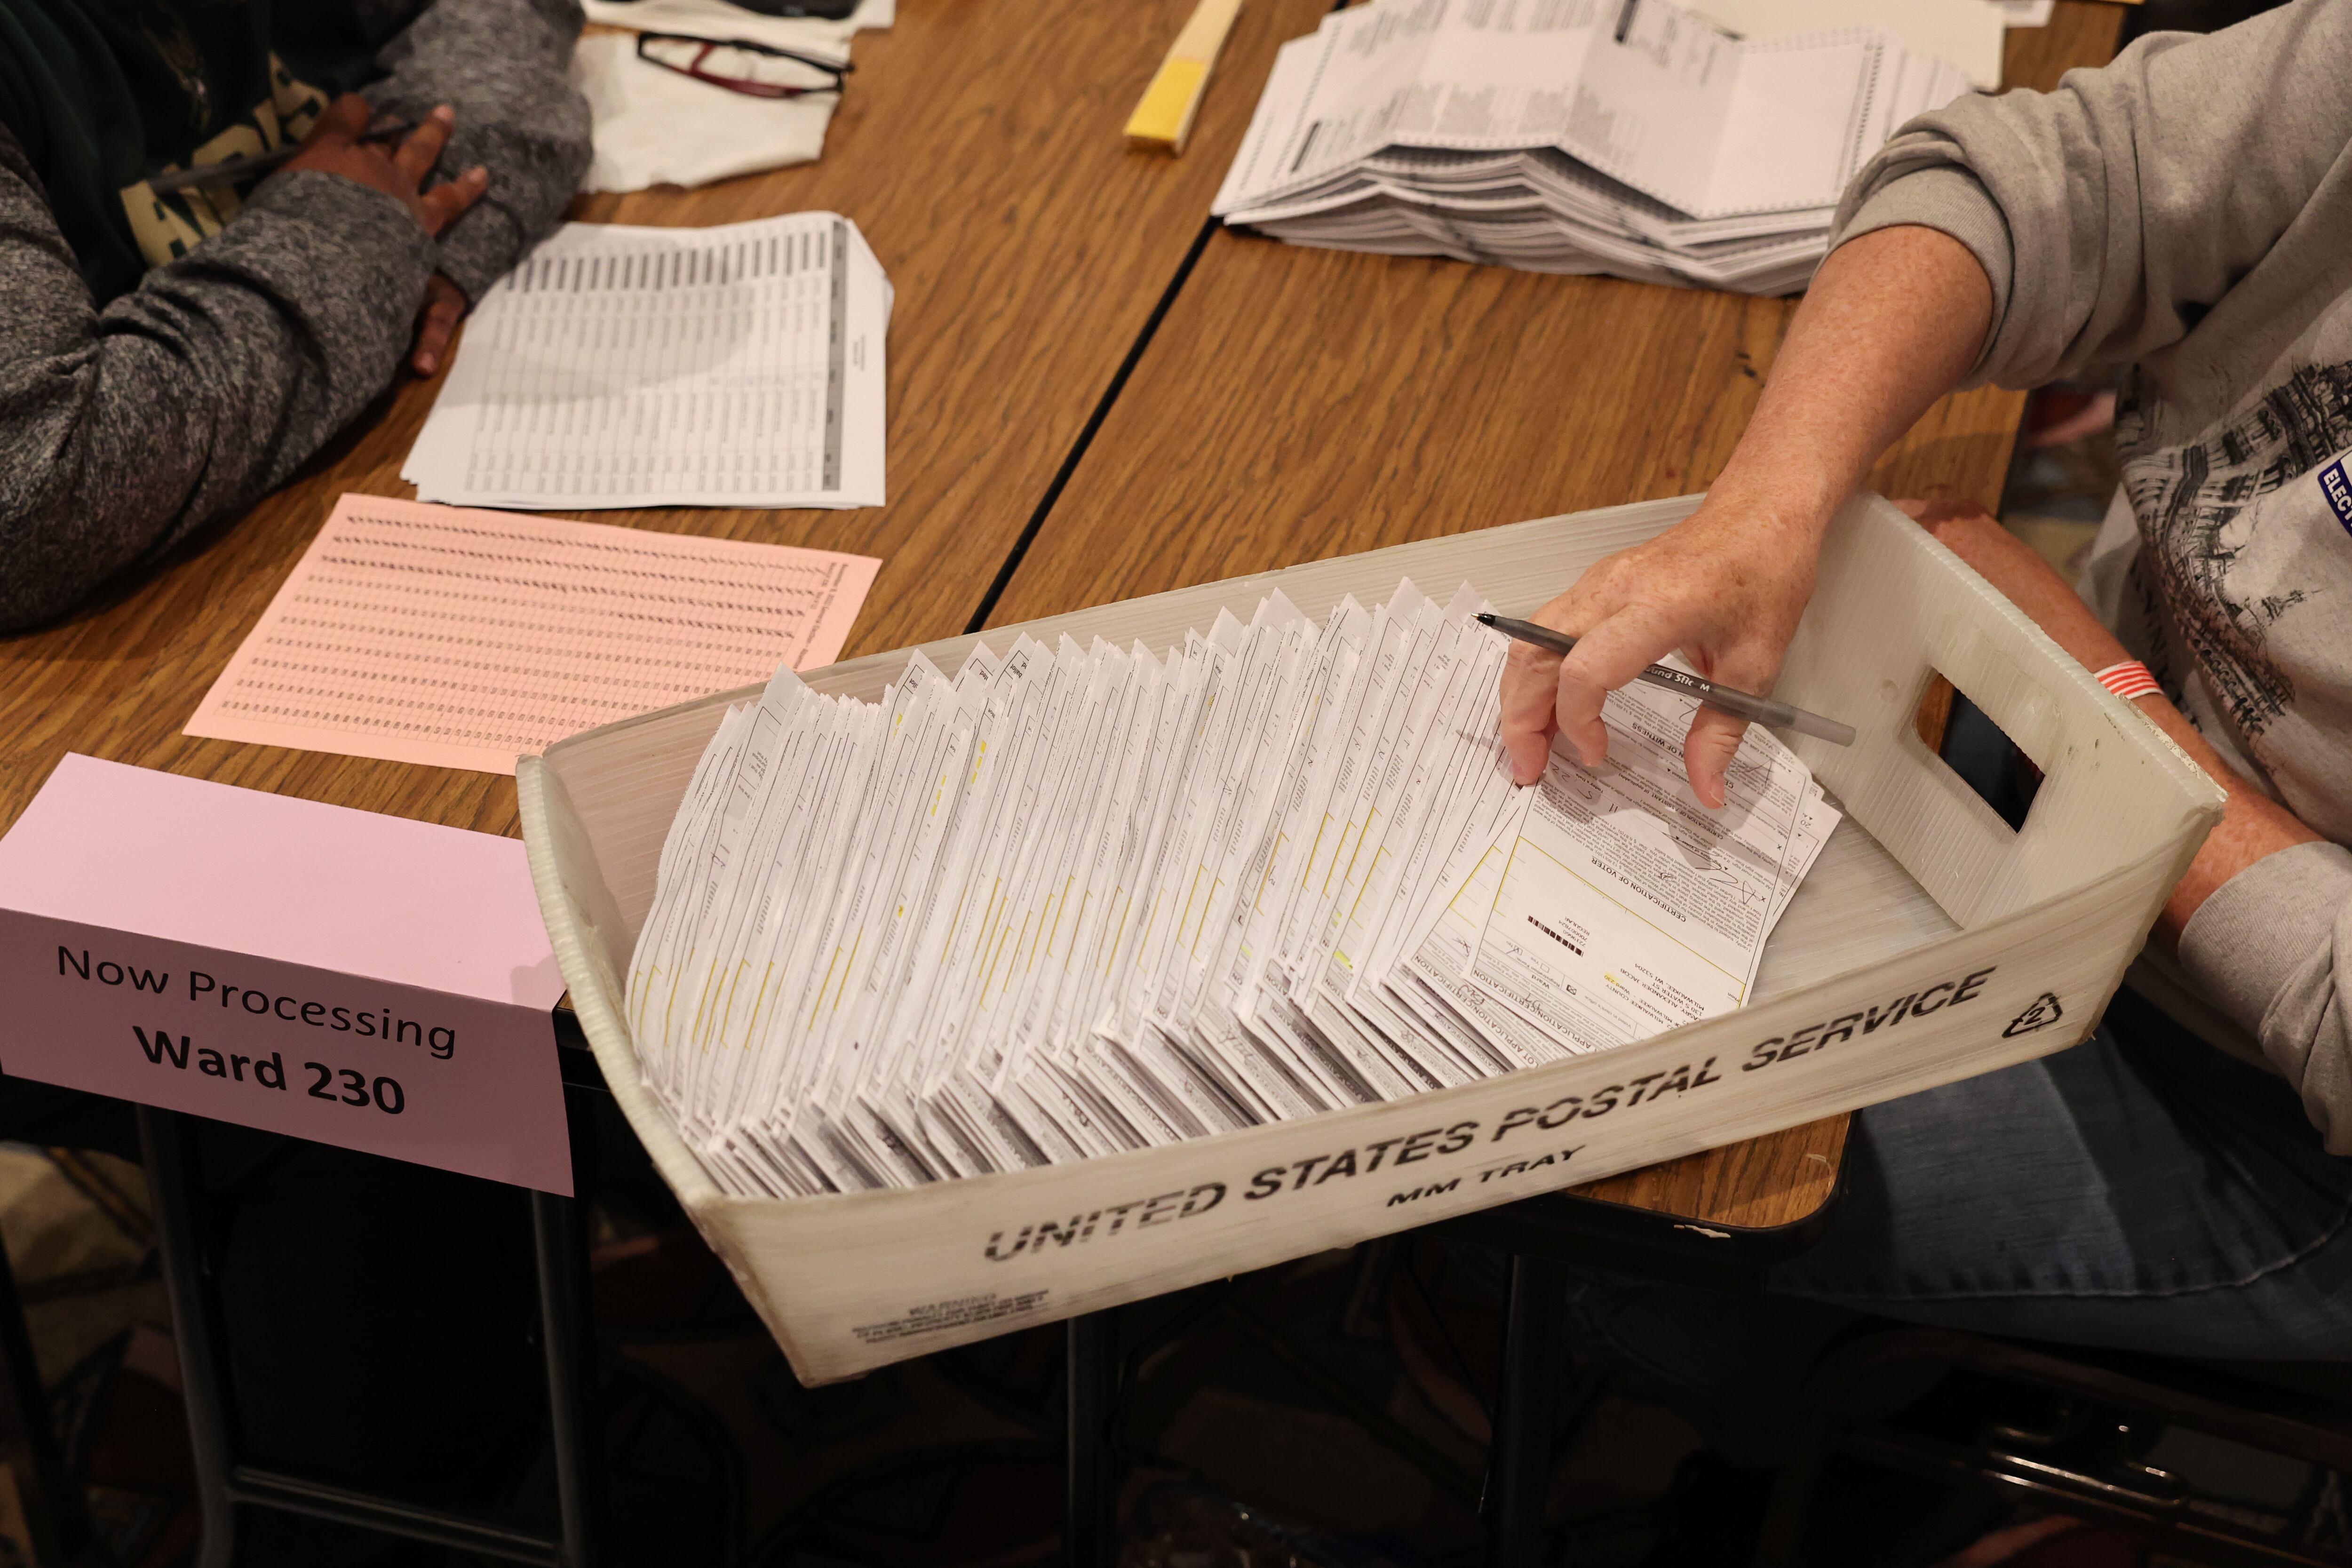 A bird's eye view of a person sitting at a wooden table with their hand in a box sorting through absentee ballots.